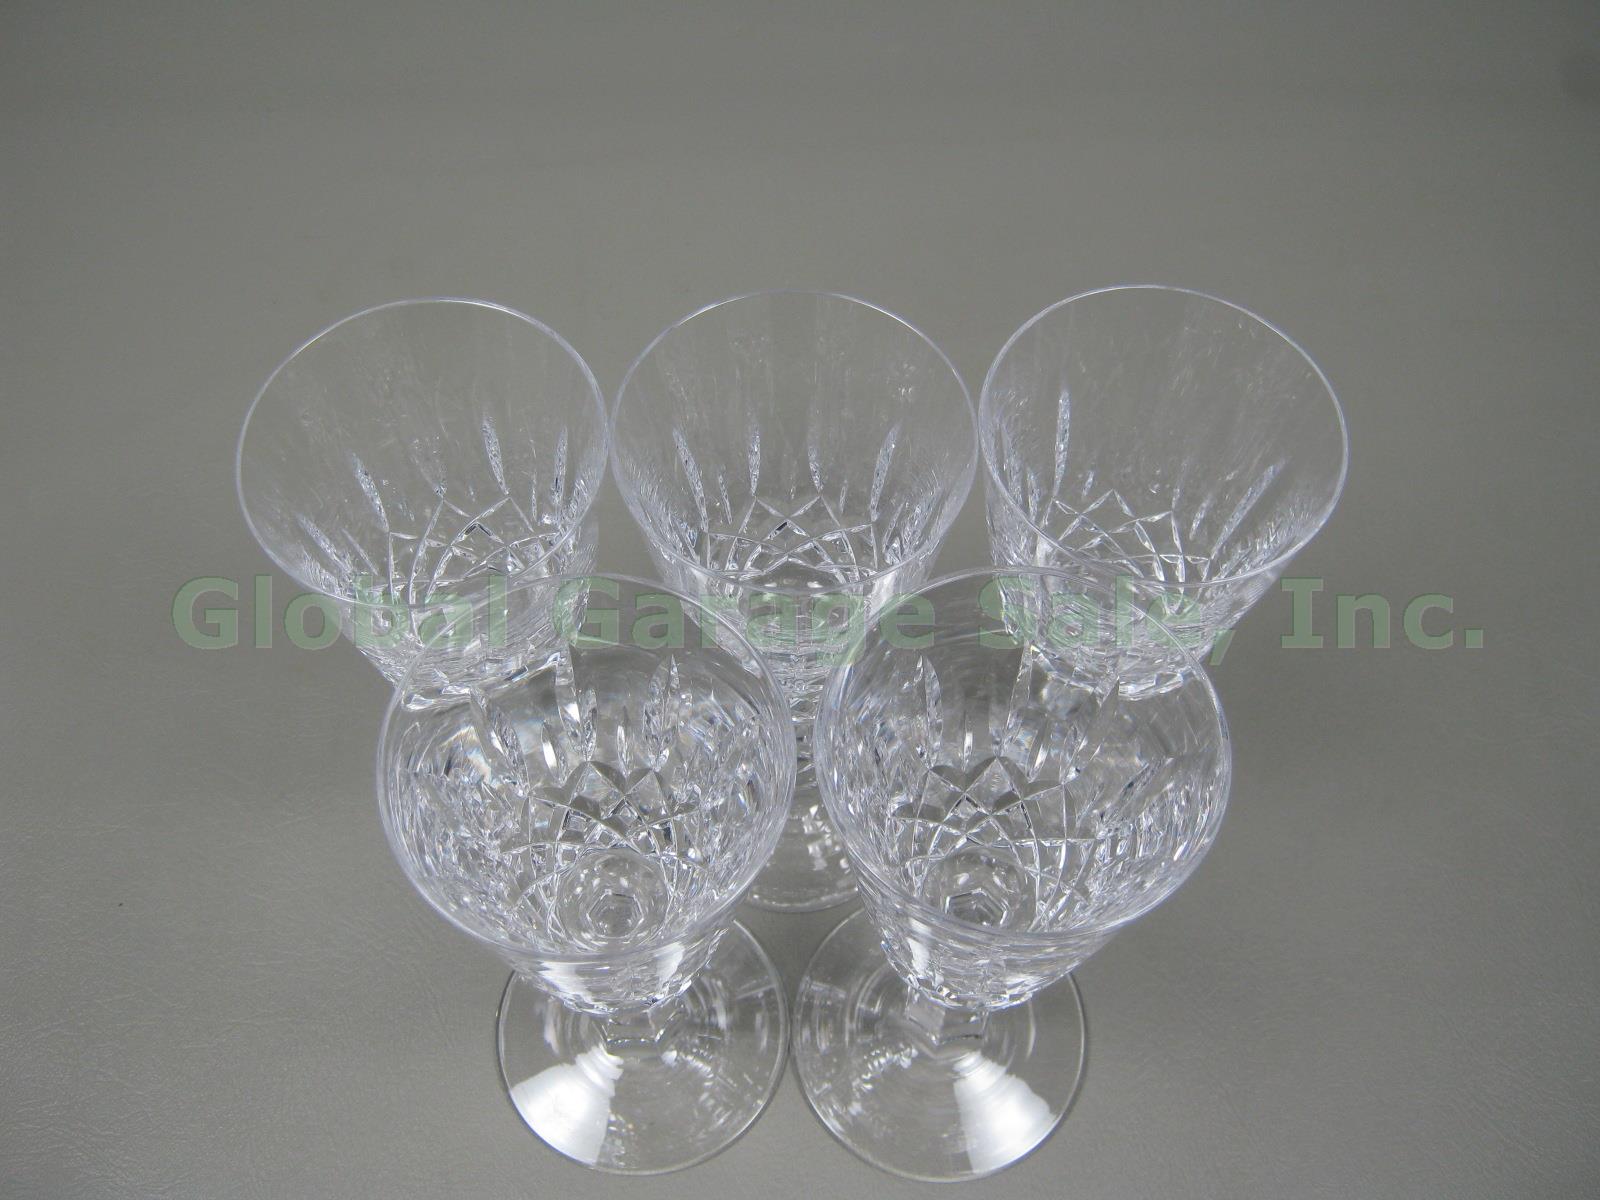 5 Vtg Galway Cut Lead Irish Crystal Red White Wine Water Glasses Goblets 7-3/8" 1